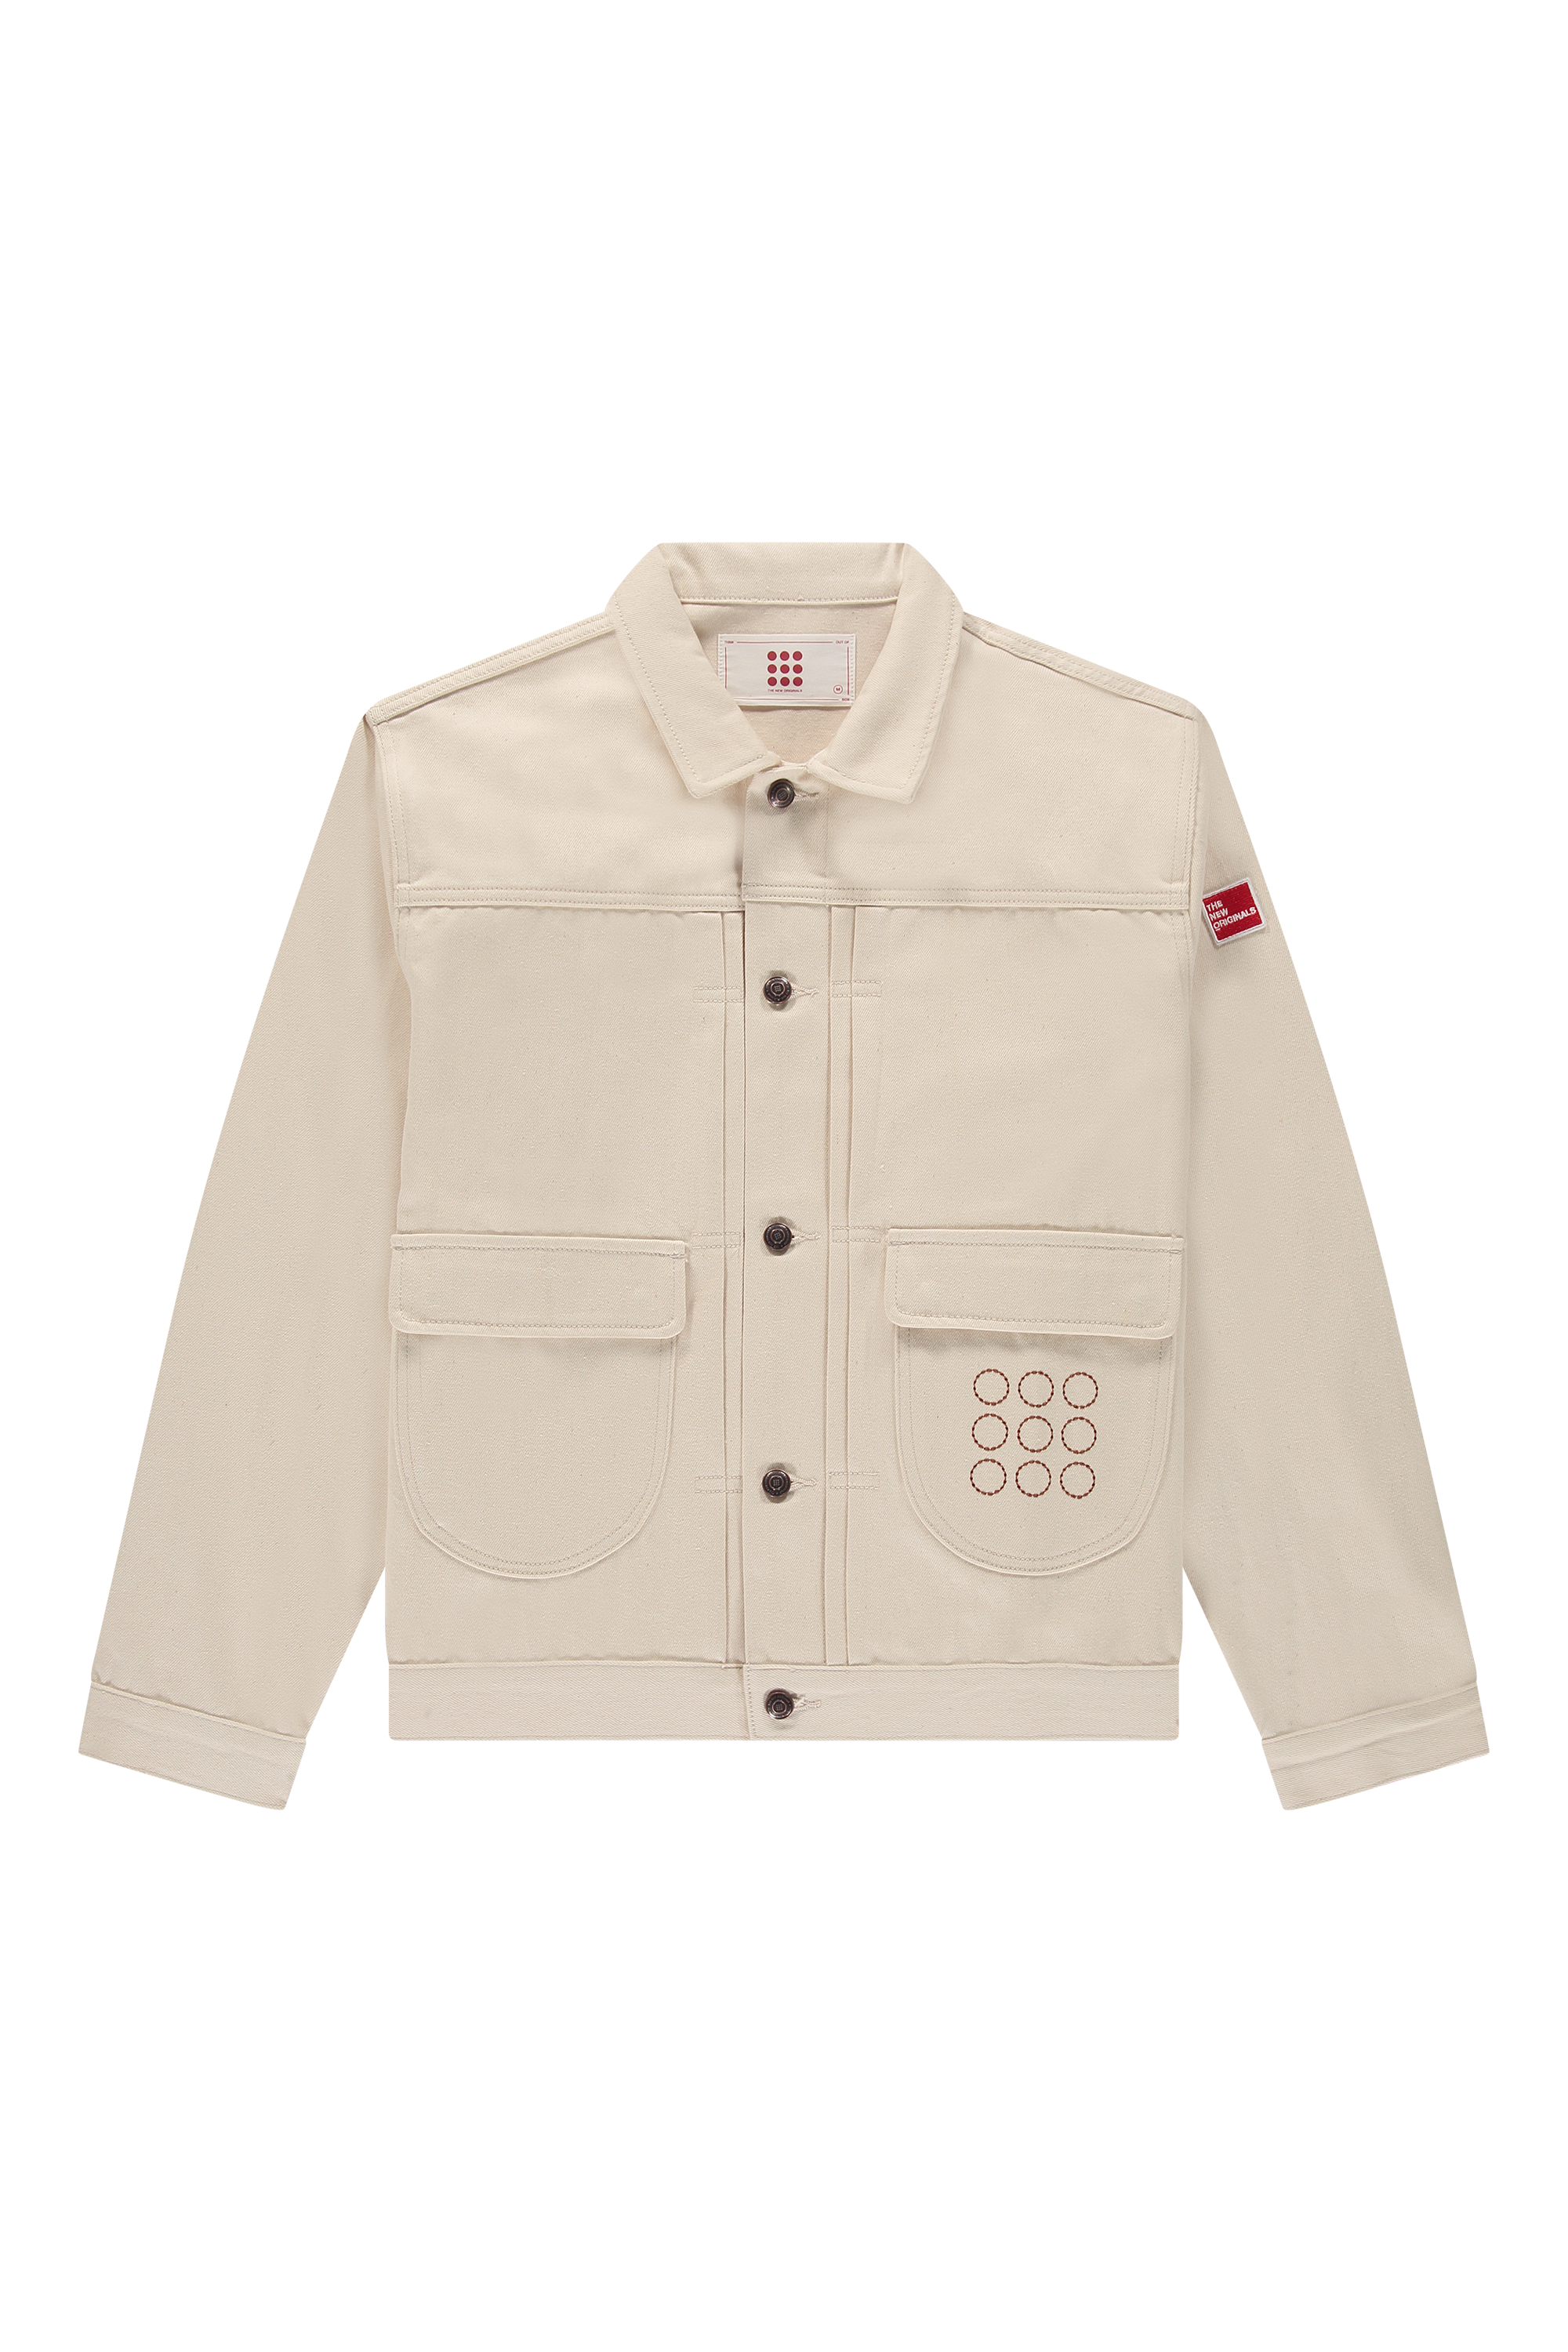 products-type9jacket_whitealyssum_front-png